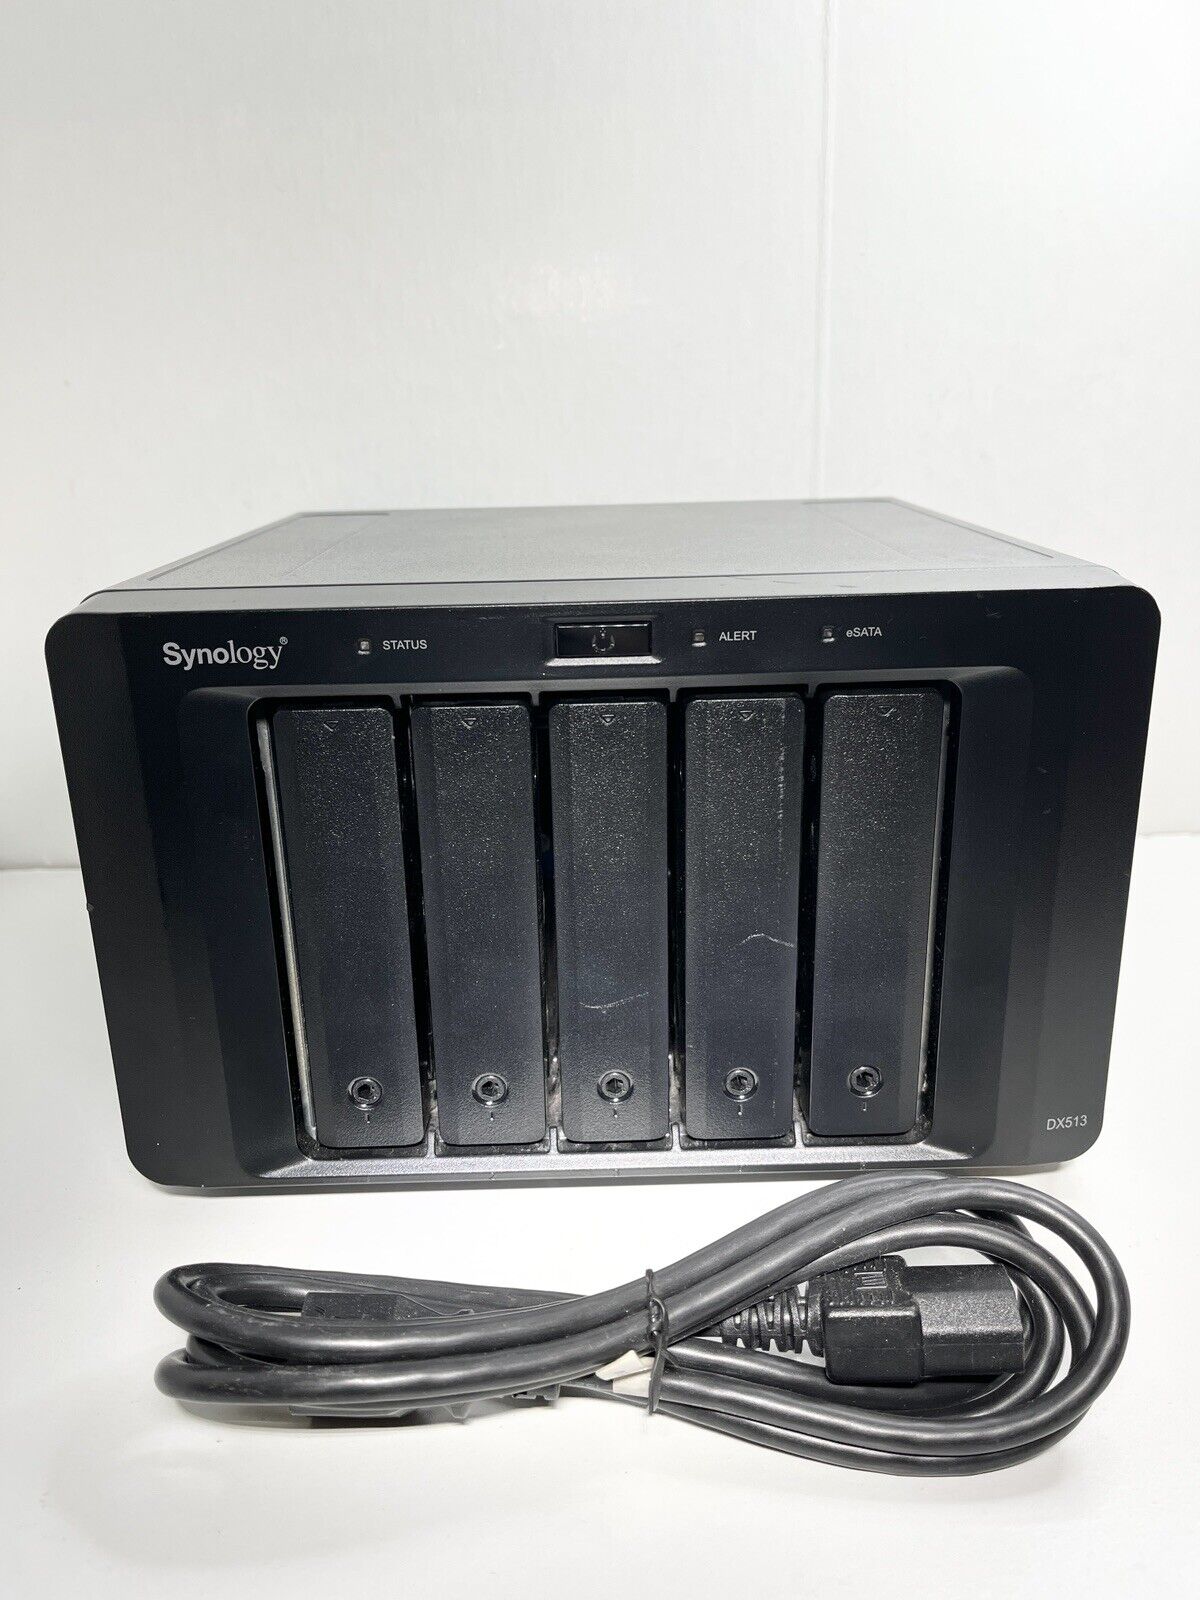 Synology DX513 5-Bay NAS Disk Expansion Unit W/ Power Cable - No Drives - READ